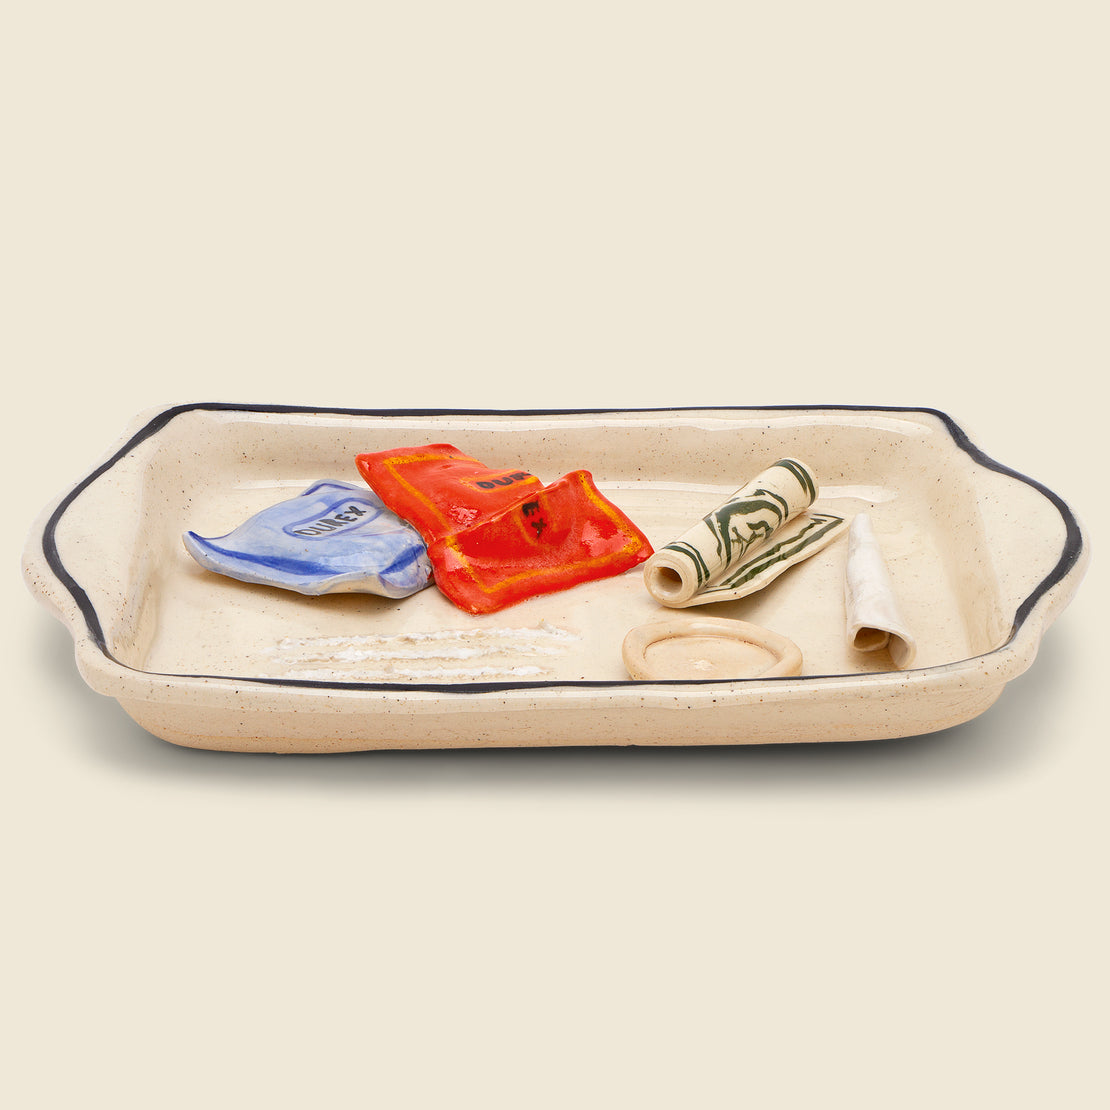 Lost Weekend Tray - Home - STAG Provisions - Home - Art & Accessories - Tray